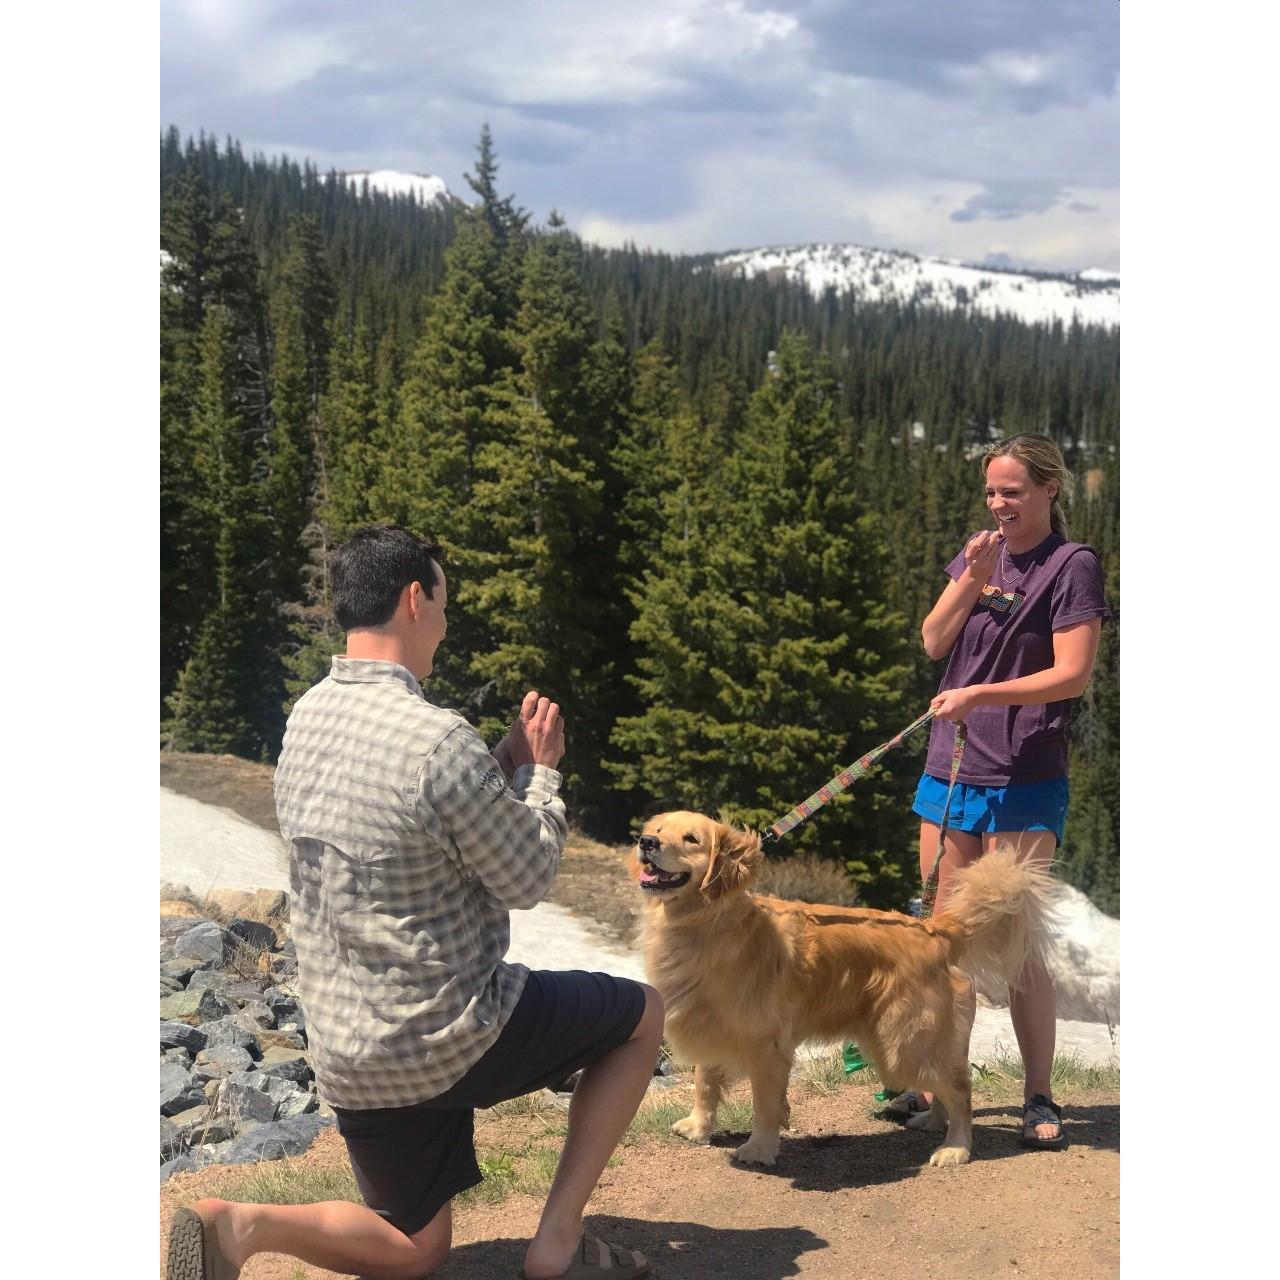 Liz said yes!  On the top of Berthud pass on the way to Steamboat Springs.  This is her favorite view in the Rocky Mountains :)